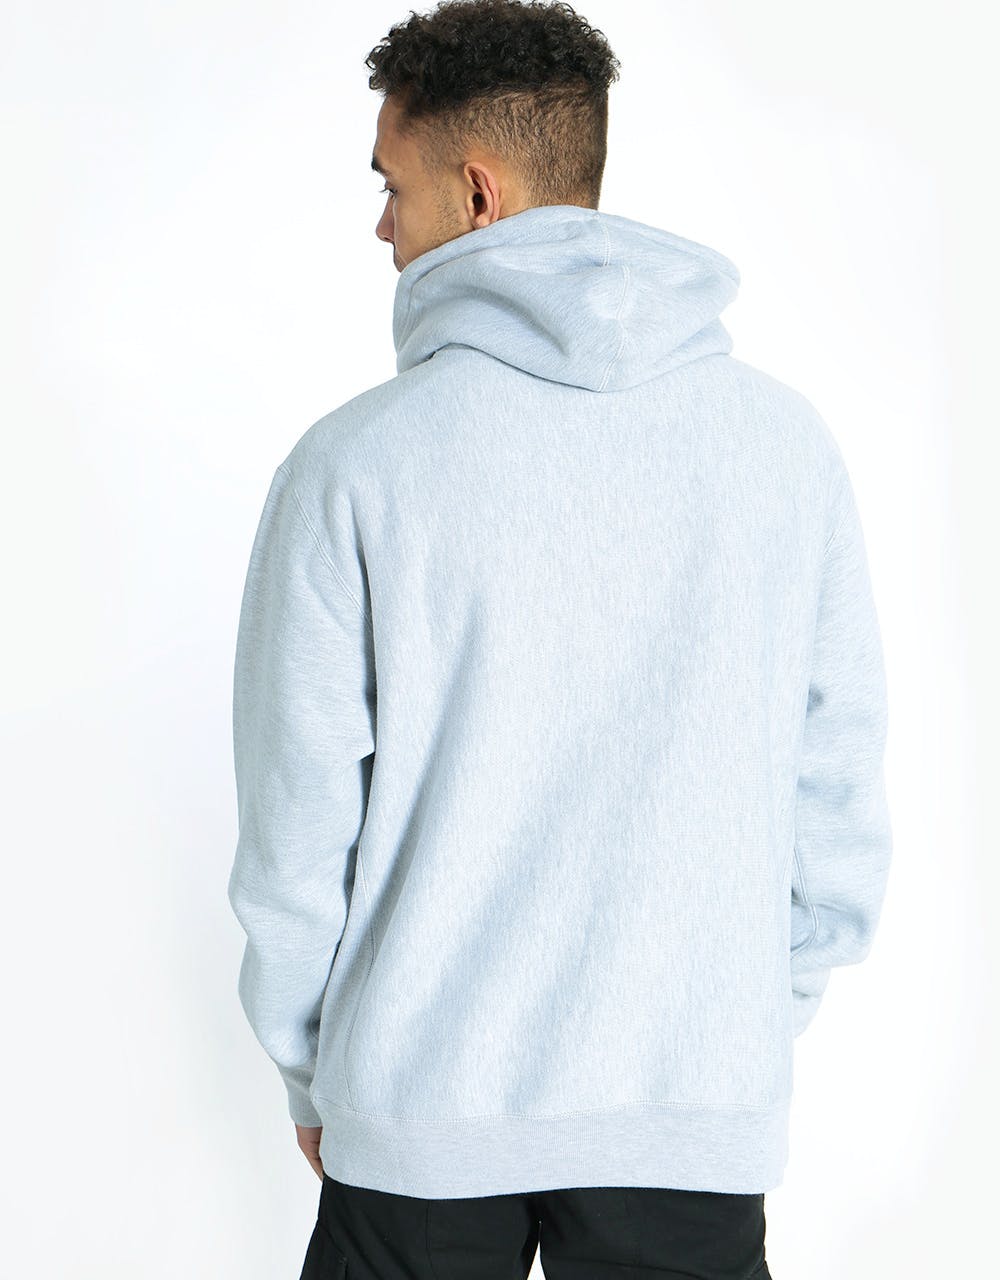 Butter Goods x FTC Stack Logo Pullover Hoodie - Ash Grey